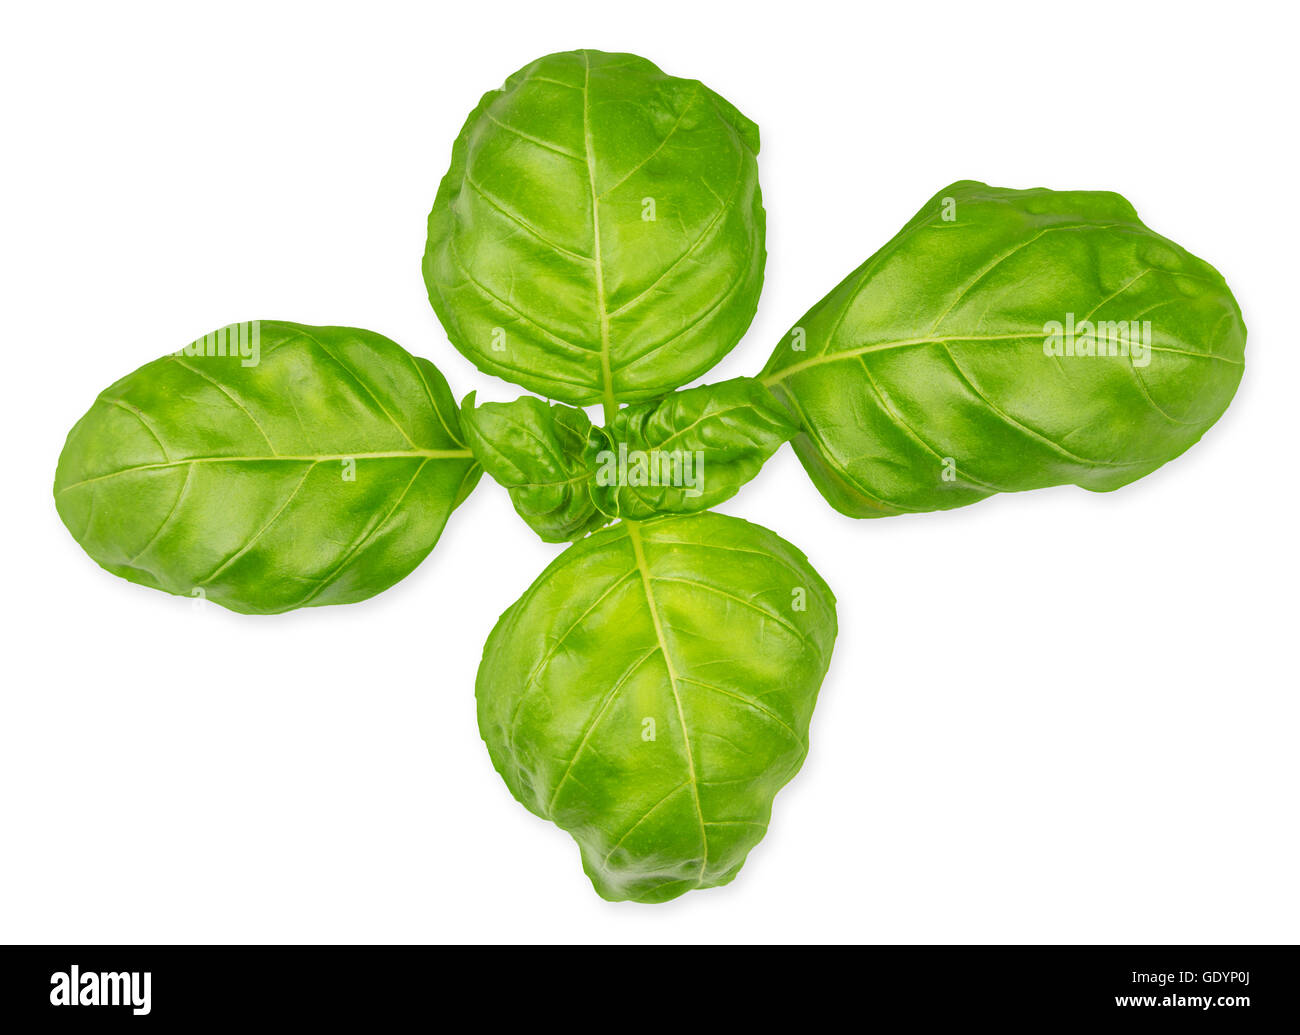 green basil herb leafs isolated on white background Stock Photo